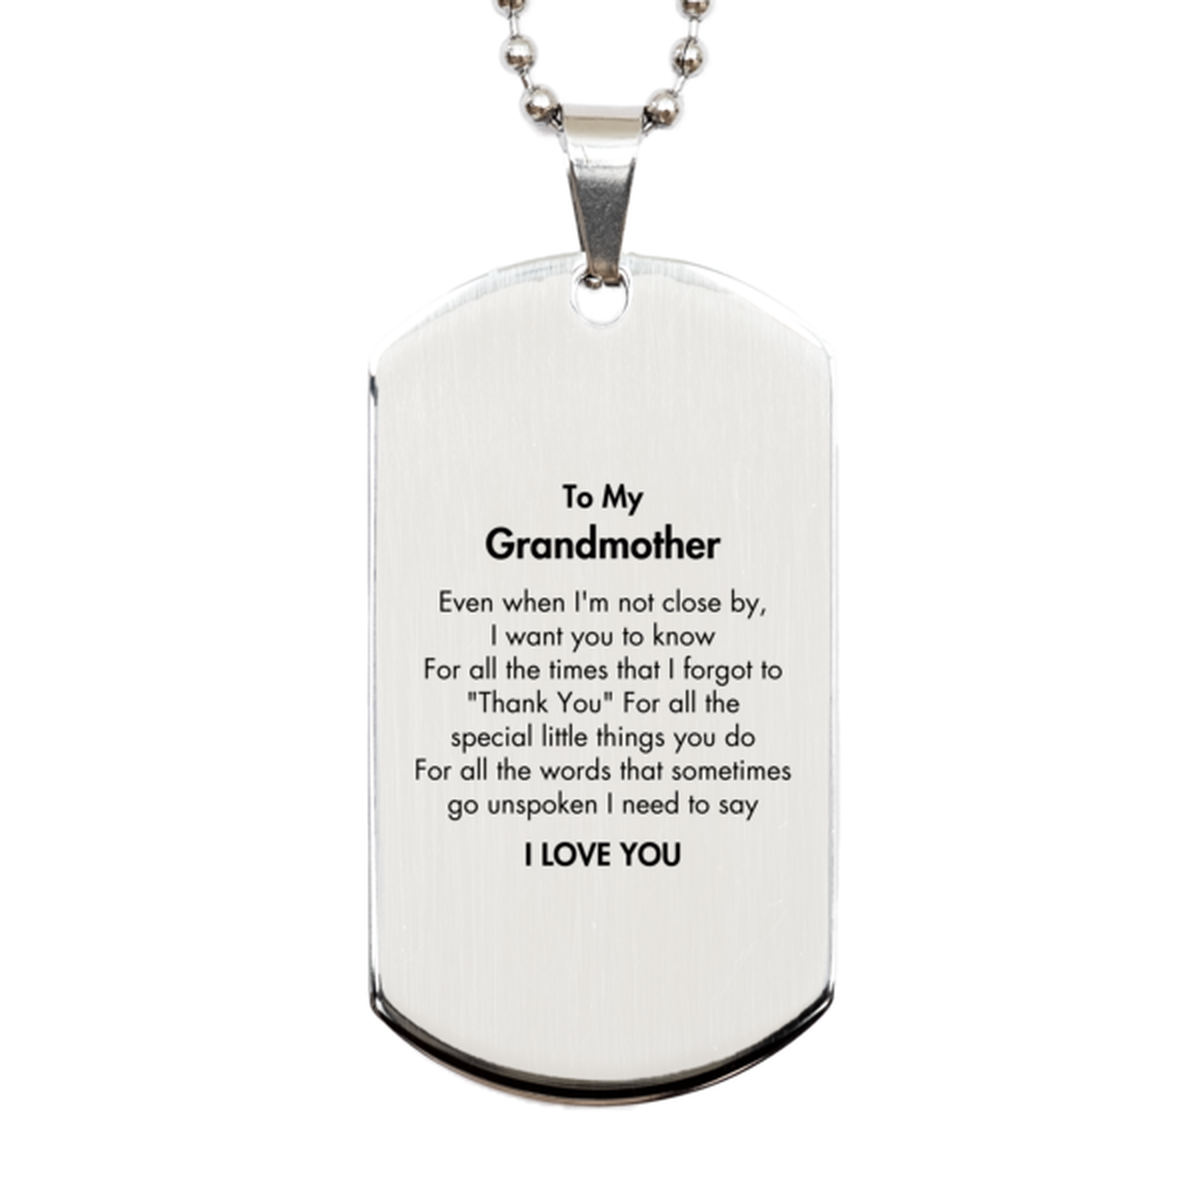 Thank You Gifts for Grandmother, Keepsake Silver Dog Tag Gifts for Grandmother Birthday Mother's day Father's Day Grandmother For all the words That sometimes go unspoken I need to say I LOVE YOU